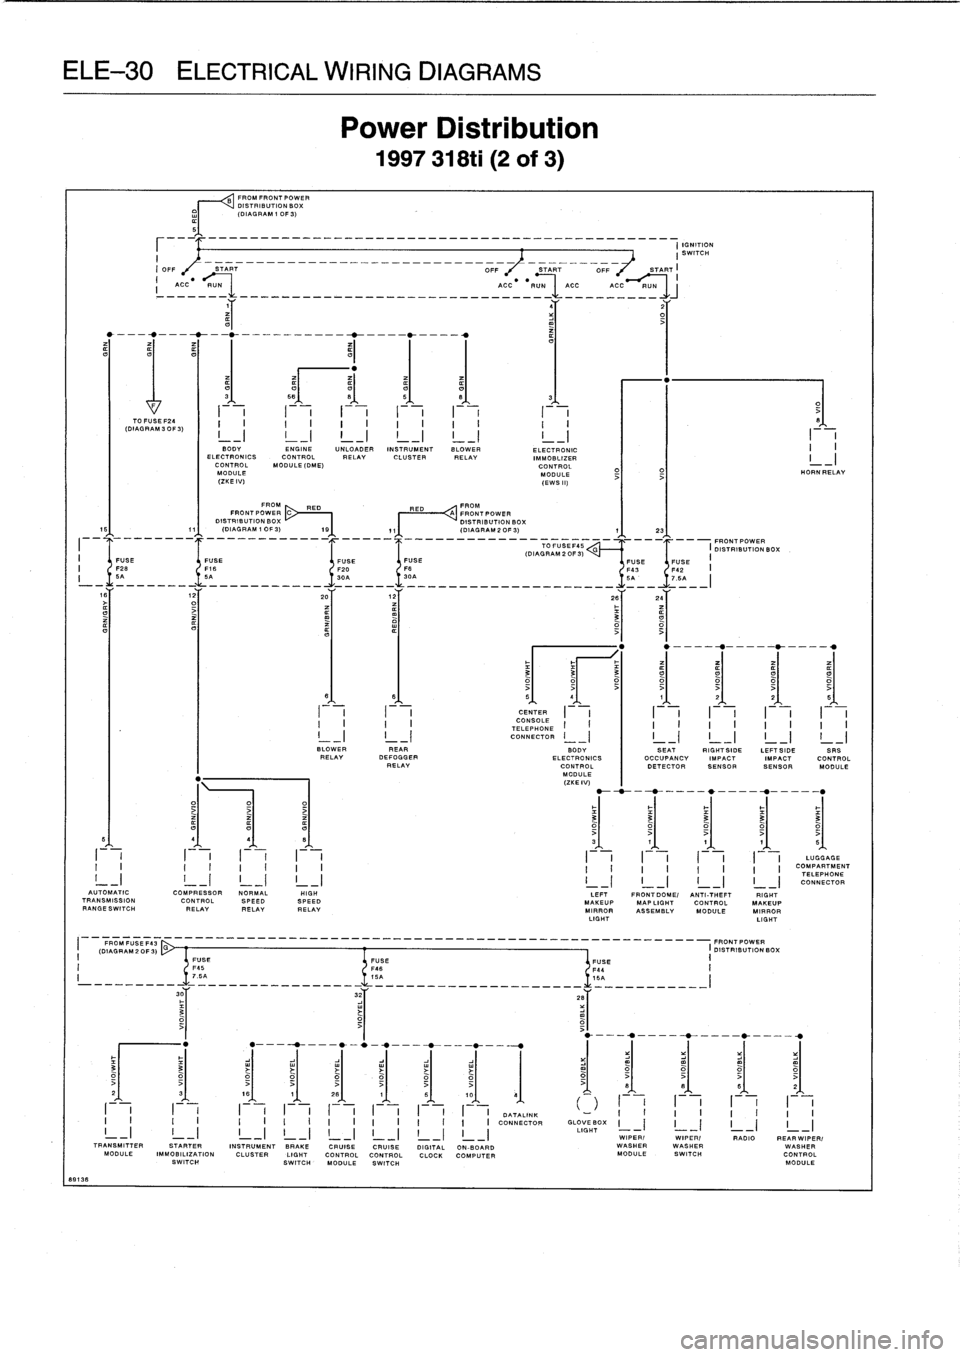 BMW 328i 1994 E36 Owners Guide 
ELE-30
ELECTRICAL
WIRING
DIAGRAMS

I
ACC
-R=_
____-____-______________
ACC
-
RUN

	

ACC
-_-C~

4Y

	

2Y

I

	

I

TO
FUSE
F24
(DIAGRAM
30F
3)

FROM
FRONT
POWER
DISTRIBUTION
BOX
(DIAGRAM
1
0F3)
IGNI